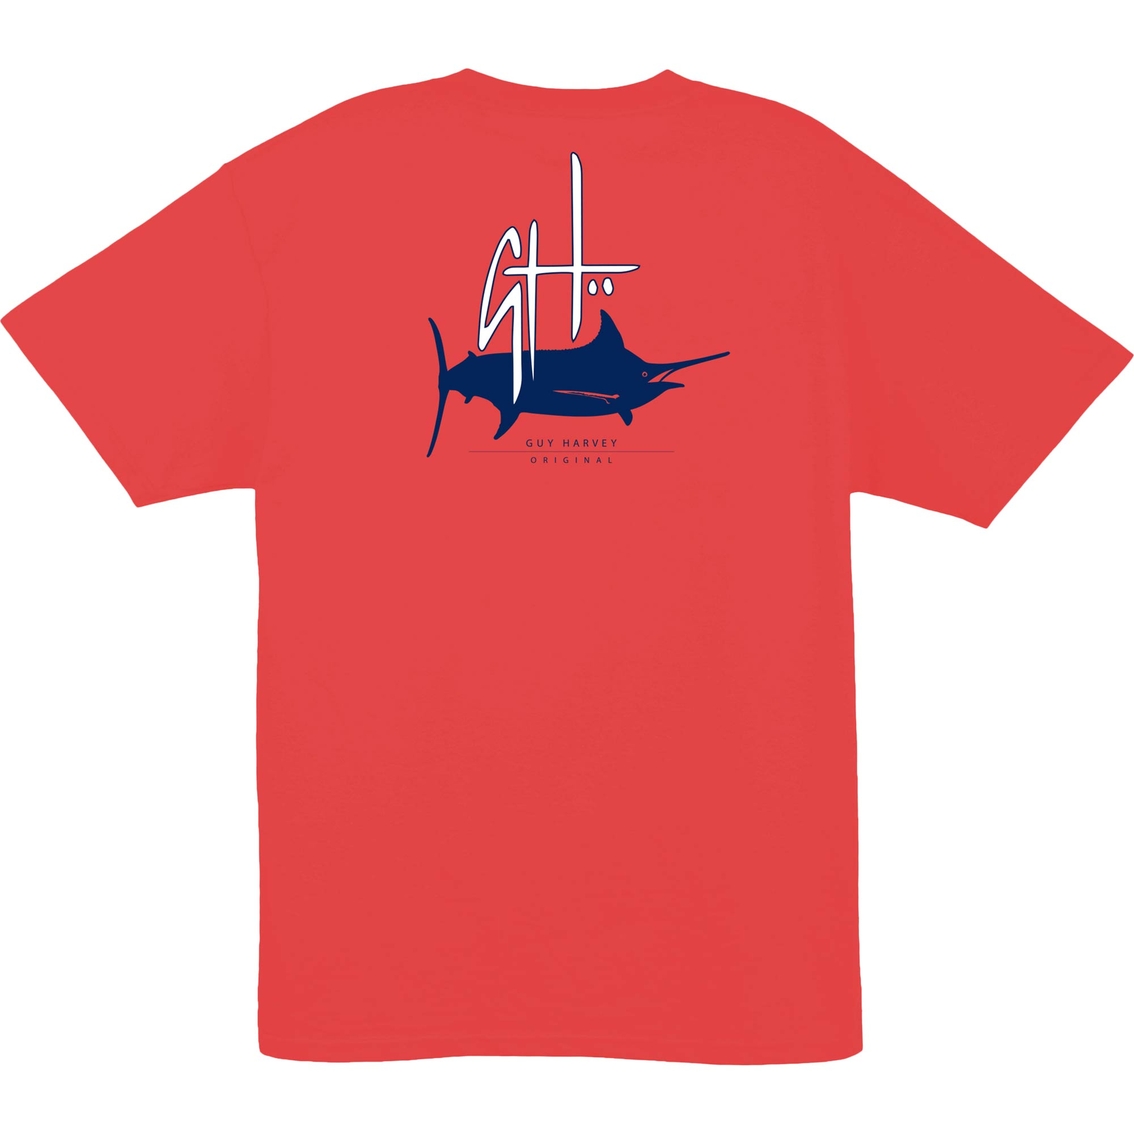 Guy Harvey Initial Logo Tee | Shirts | Clothing & Accessories | Shop ...